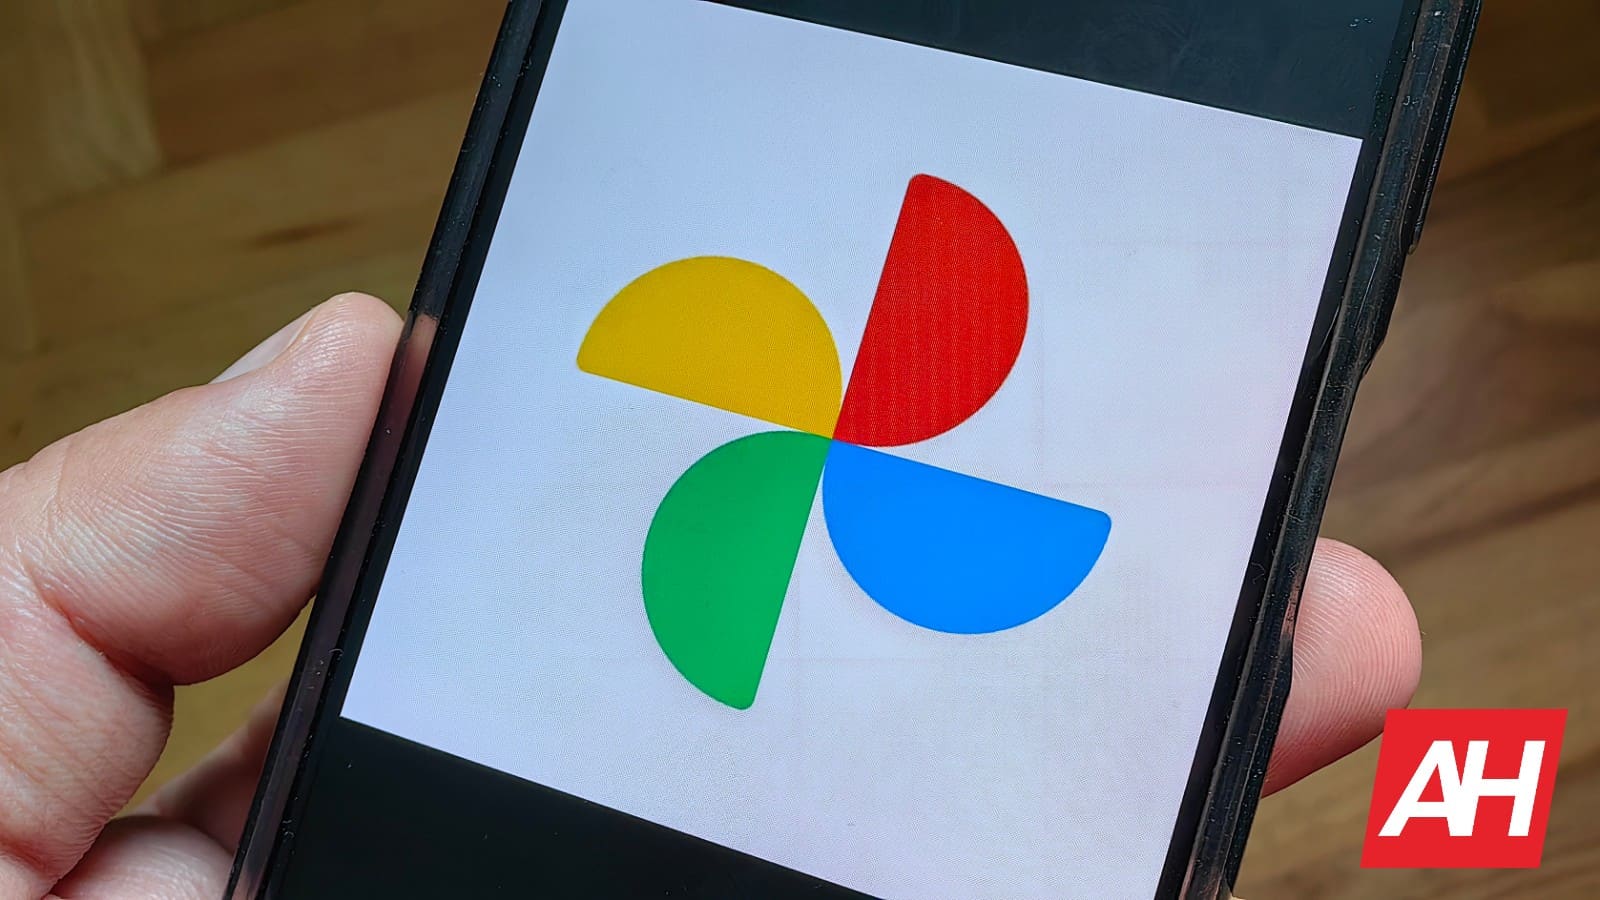 Google Photos is introducing a 'Show Less' feature for faces in Memories